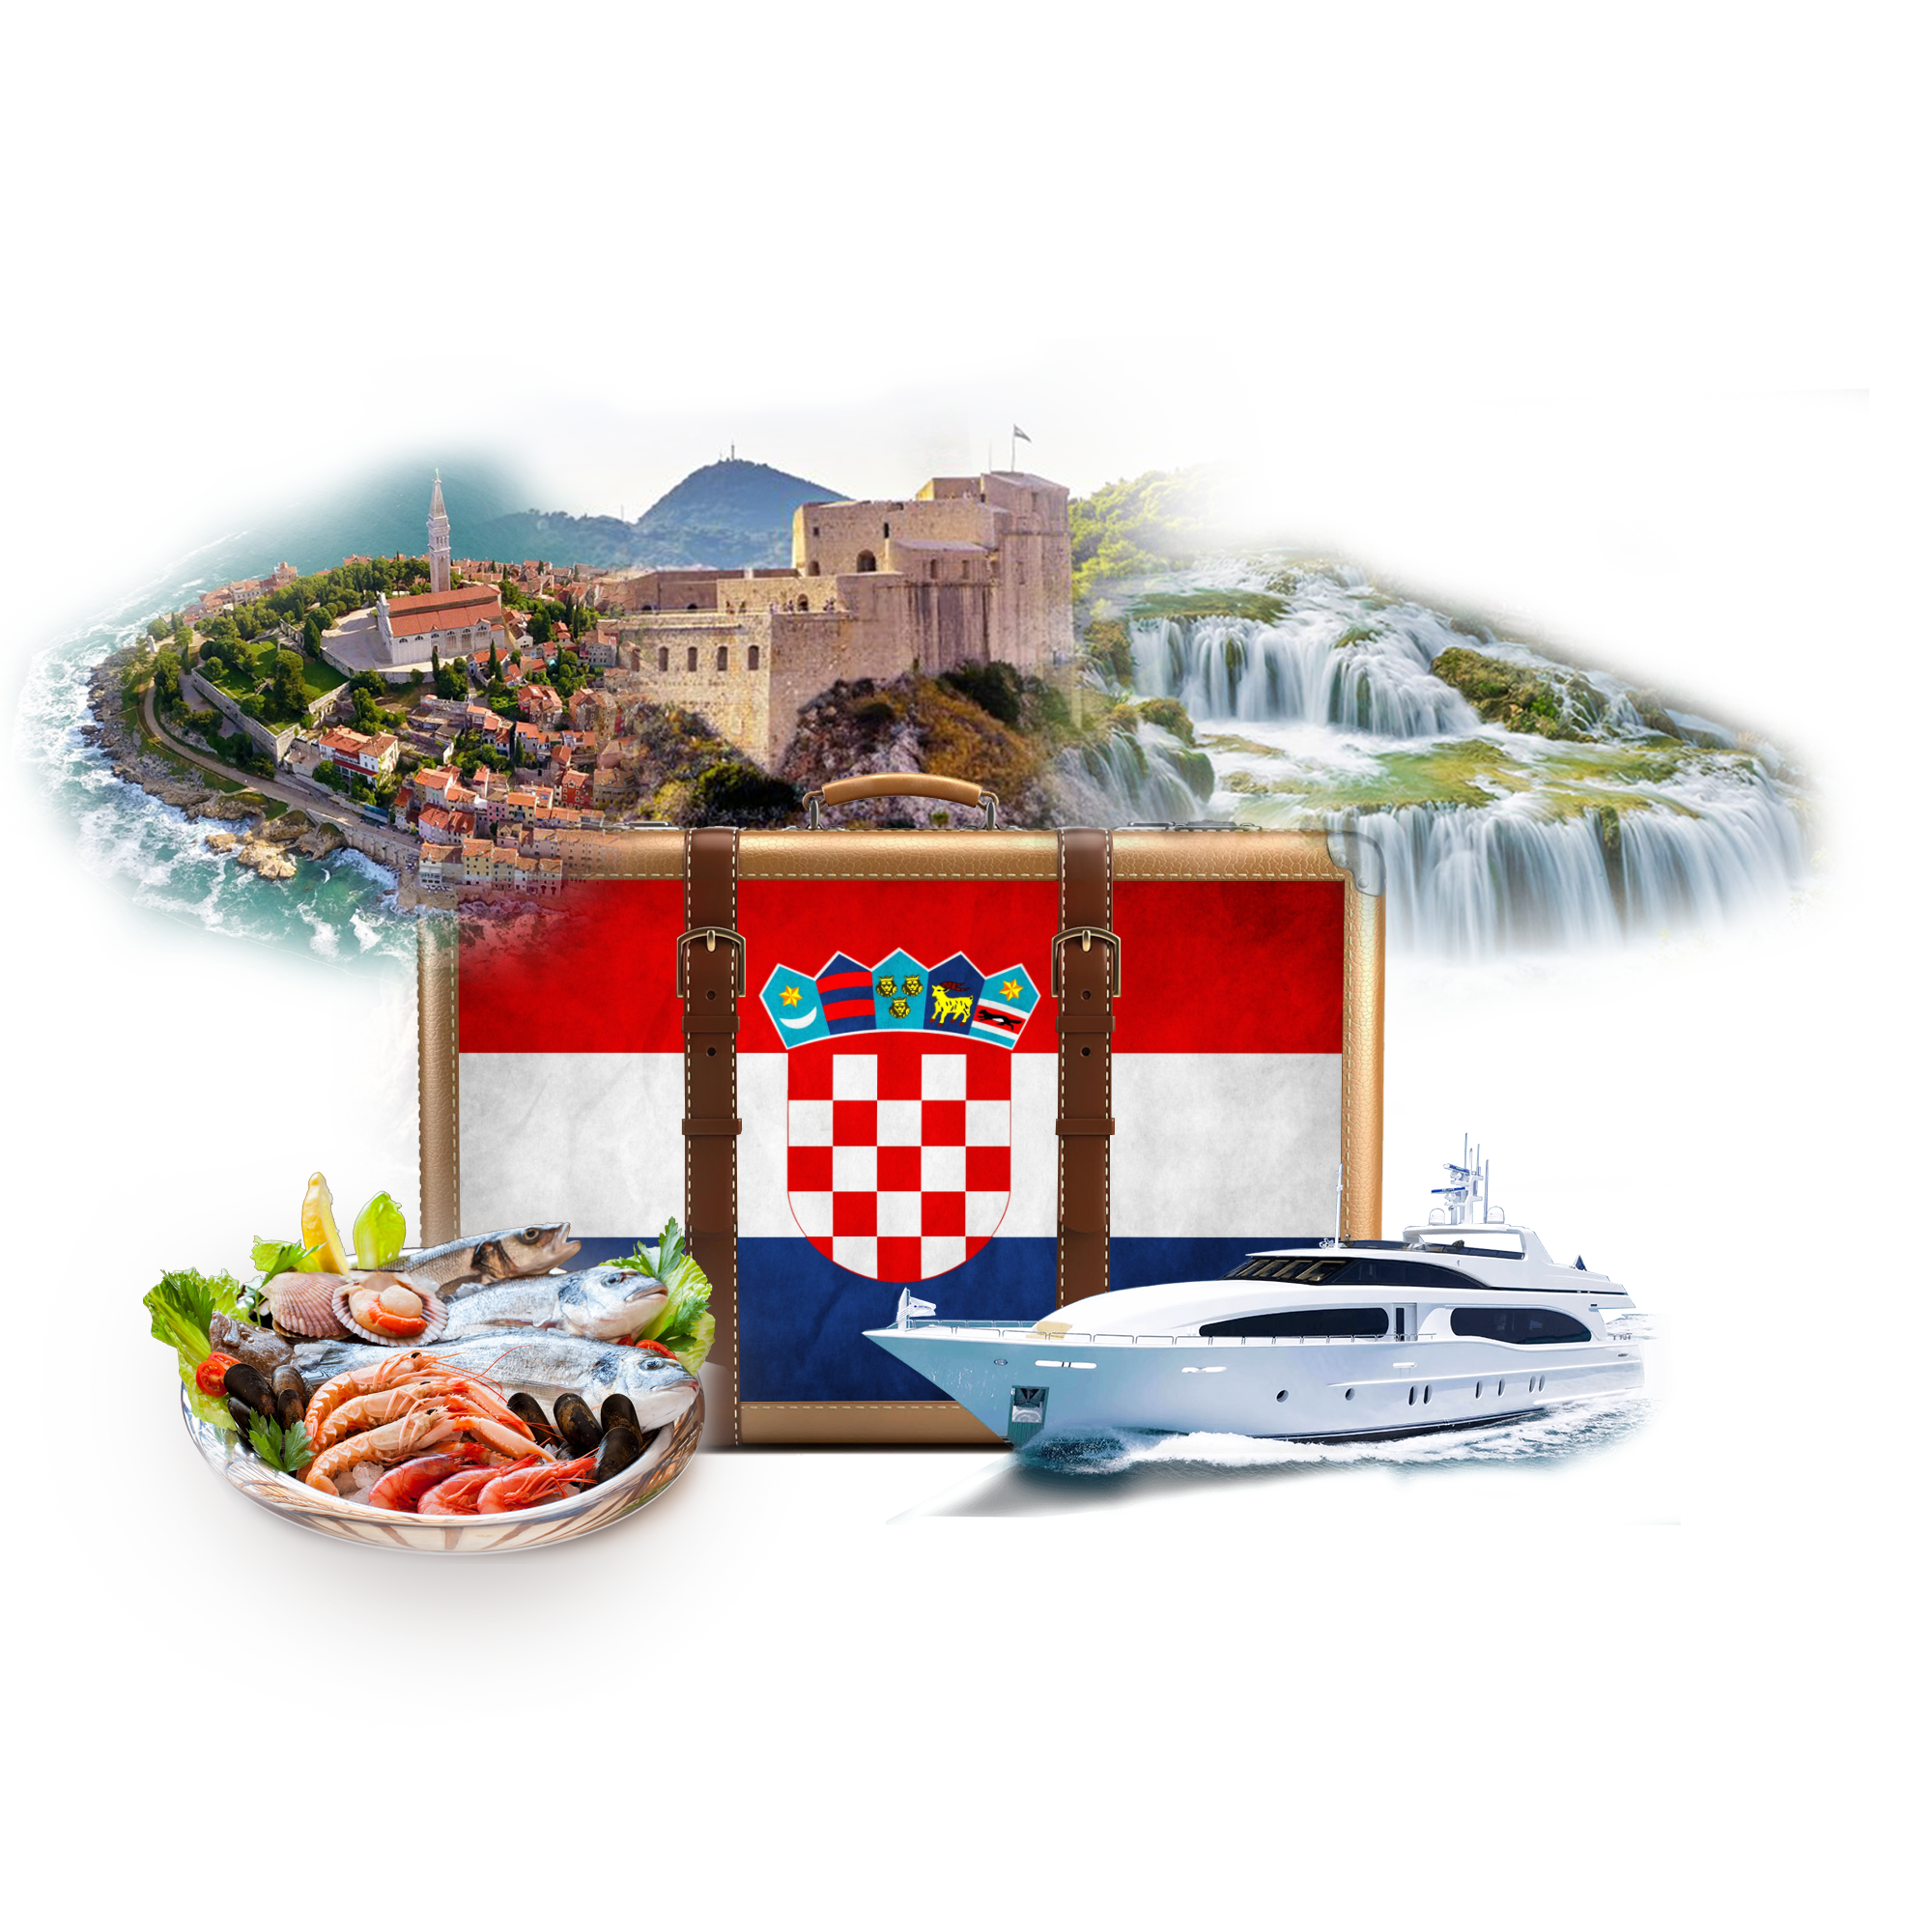 Image of a suitcase with Croatia flag and Croatia landmarks in the background